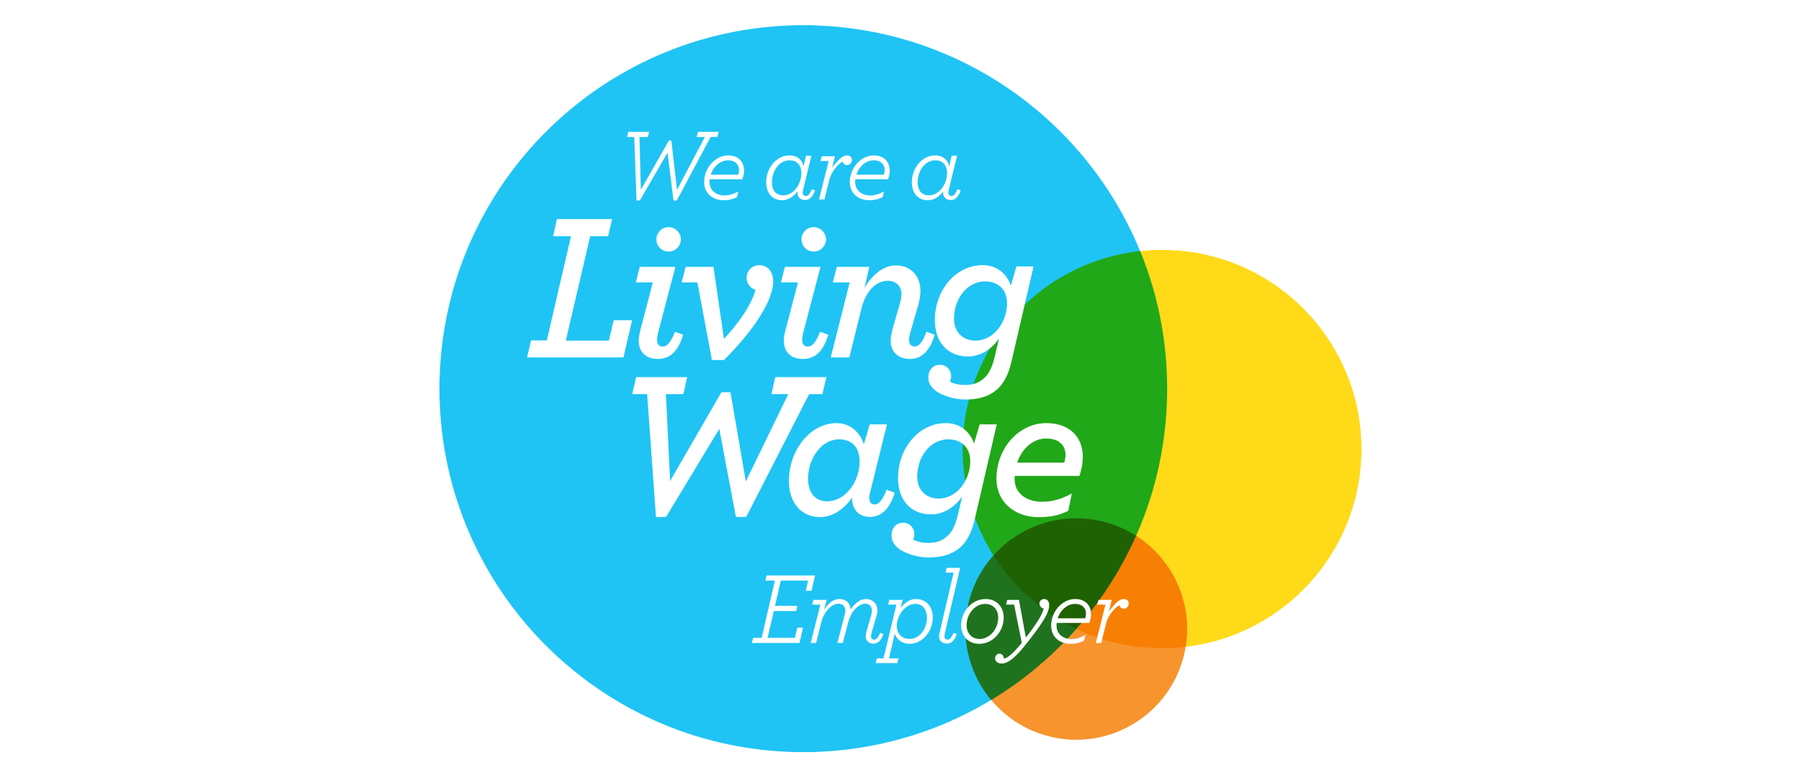 Time to celebrate as a Living Wage Employer!